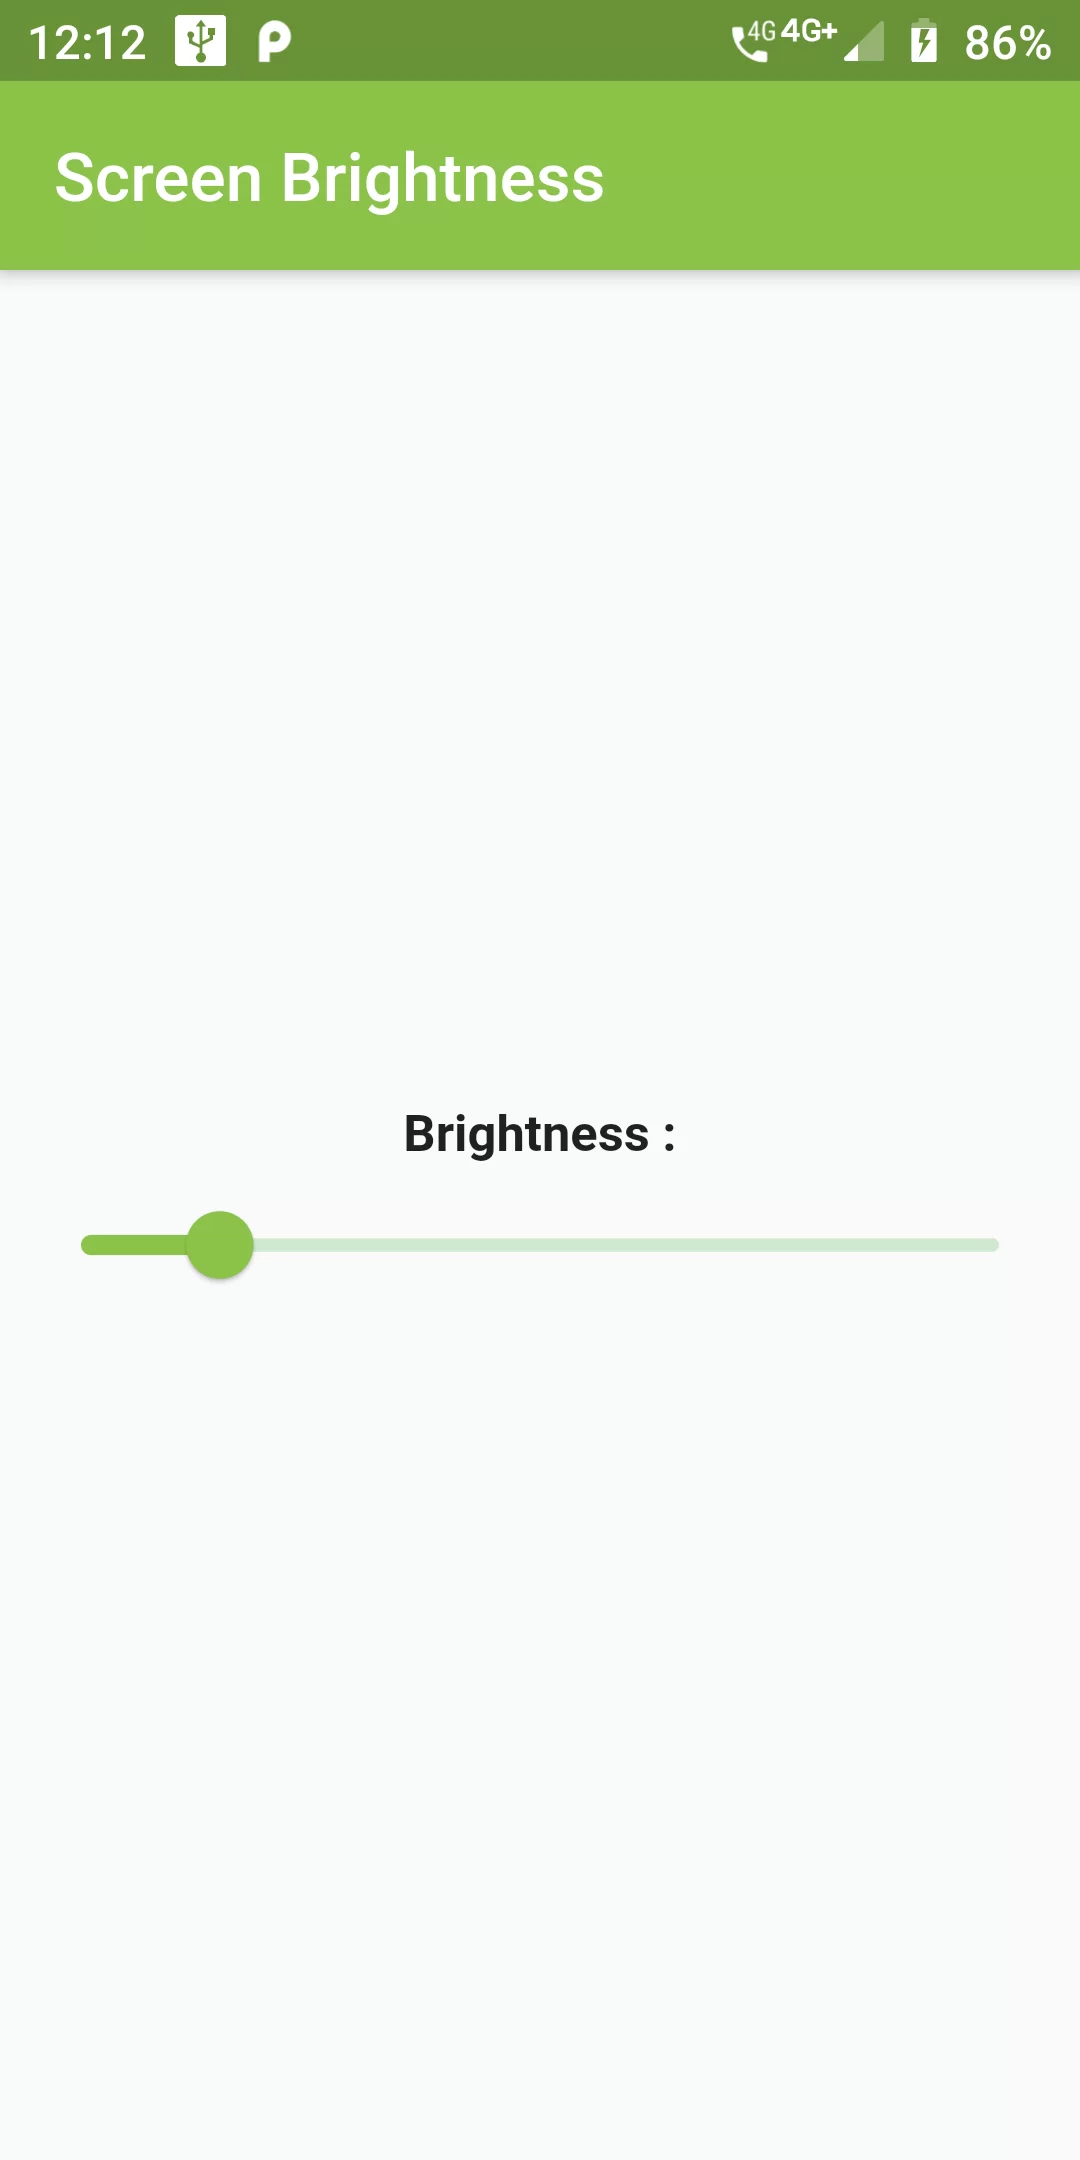 How To Create Screen Brightness Using Flutter Android App